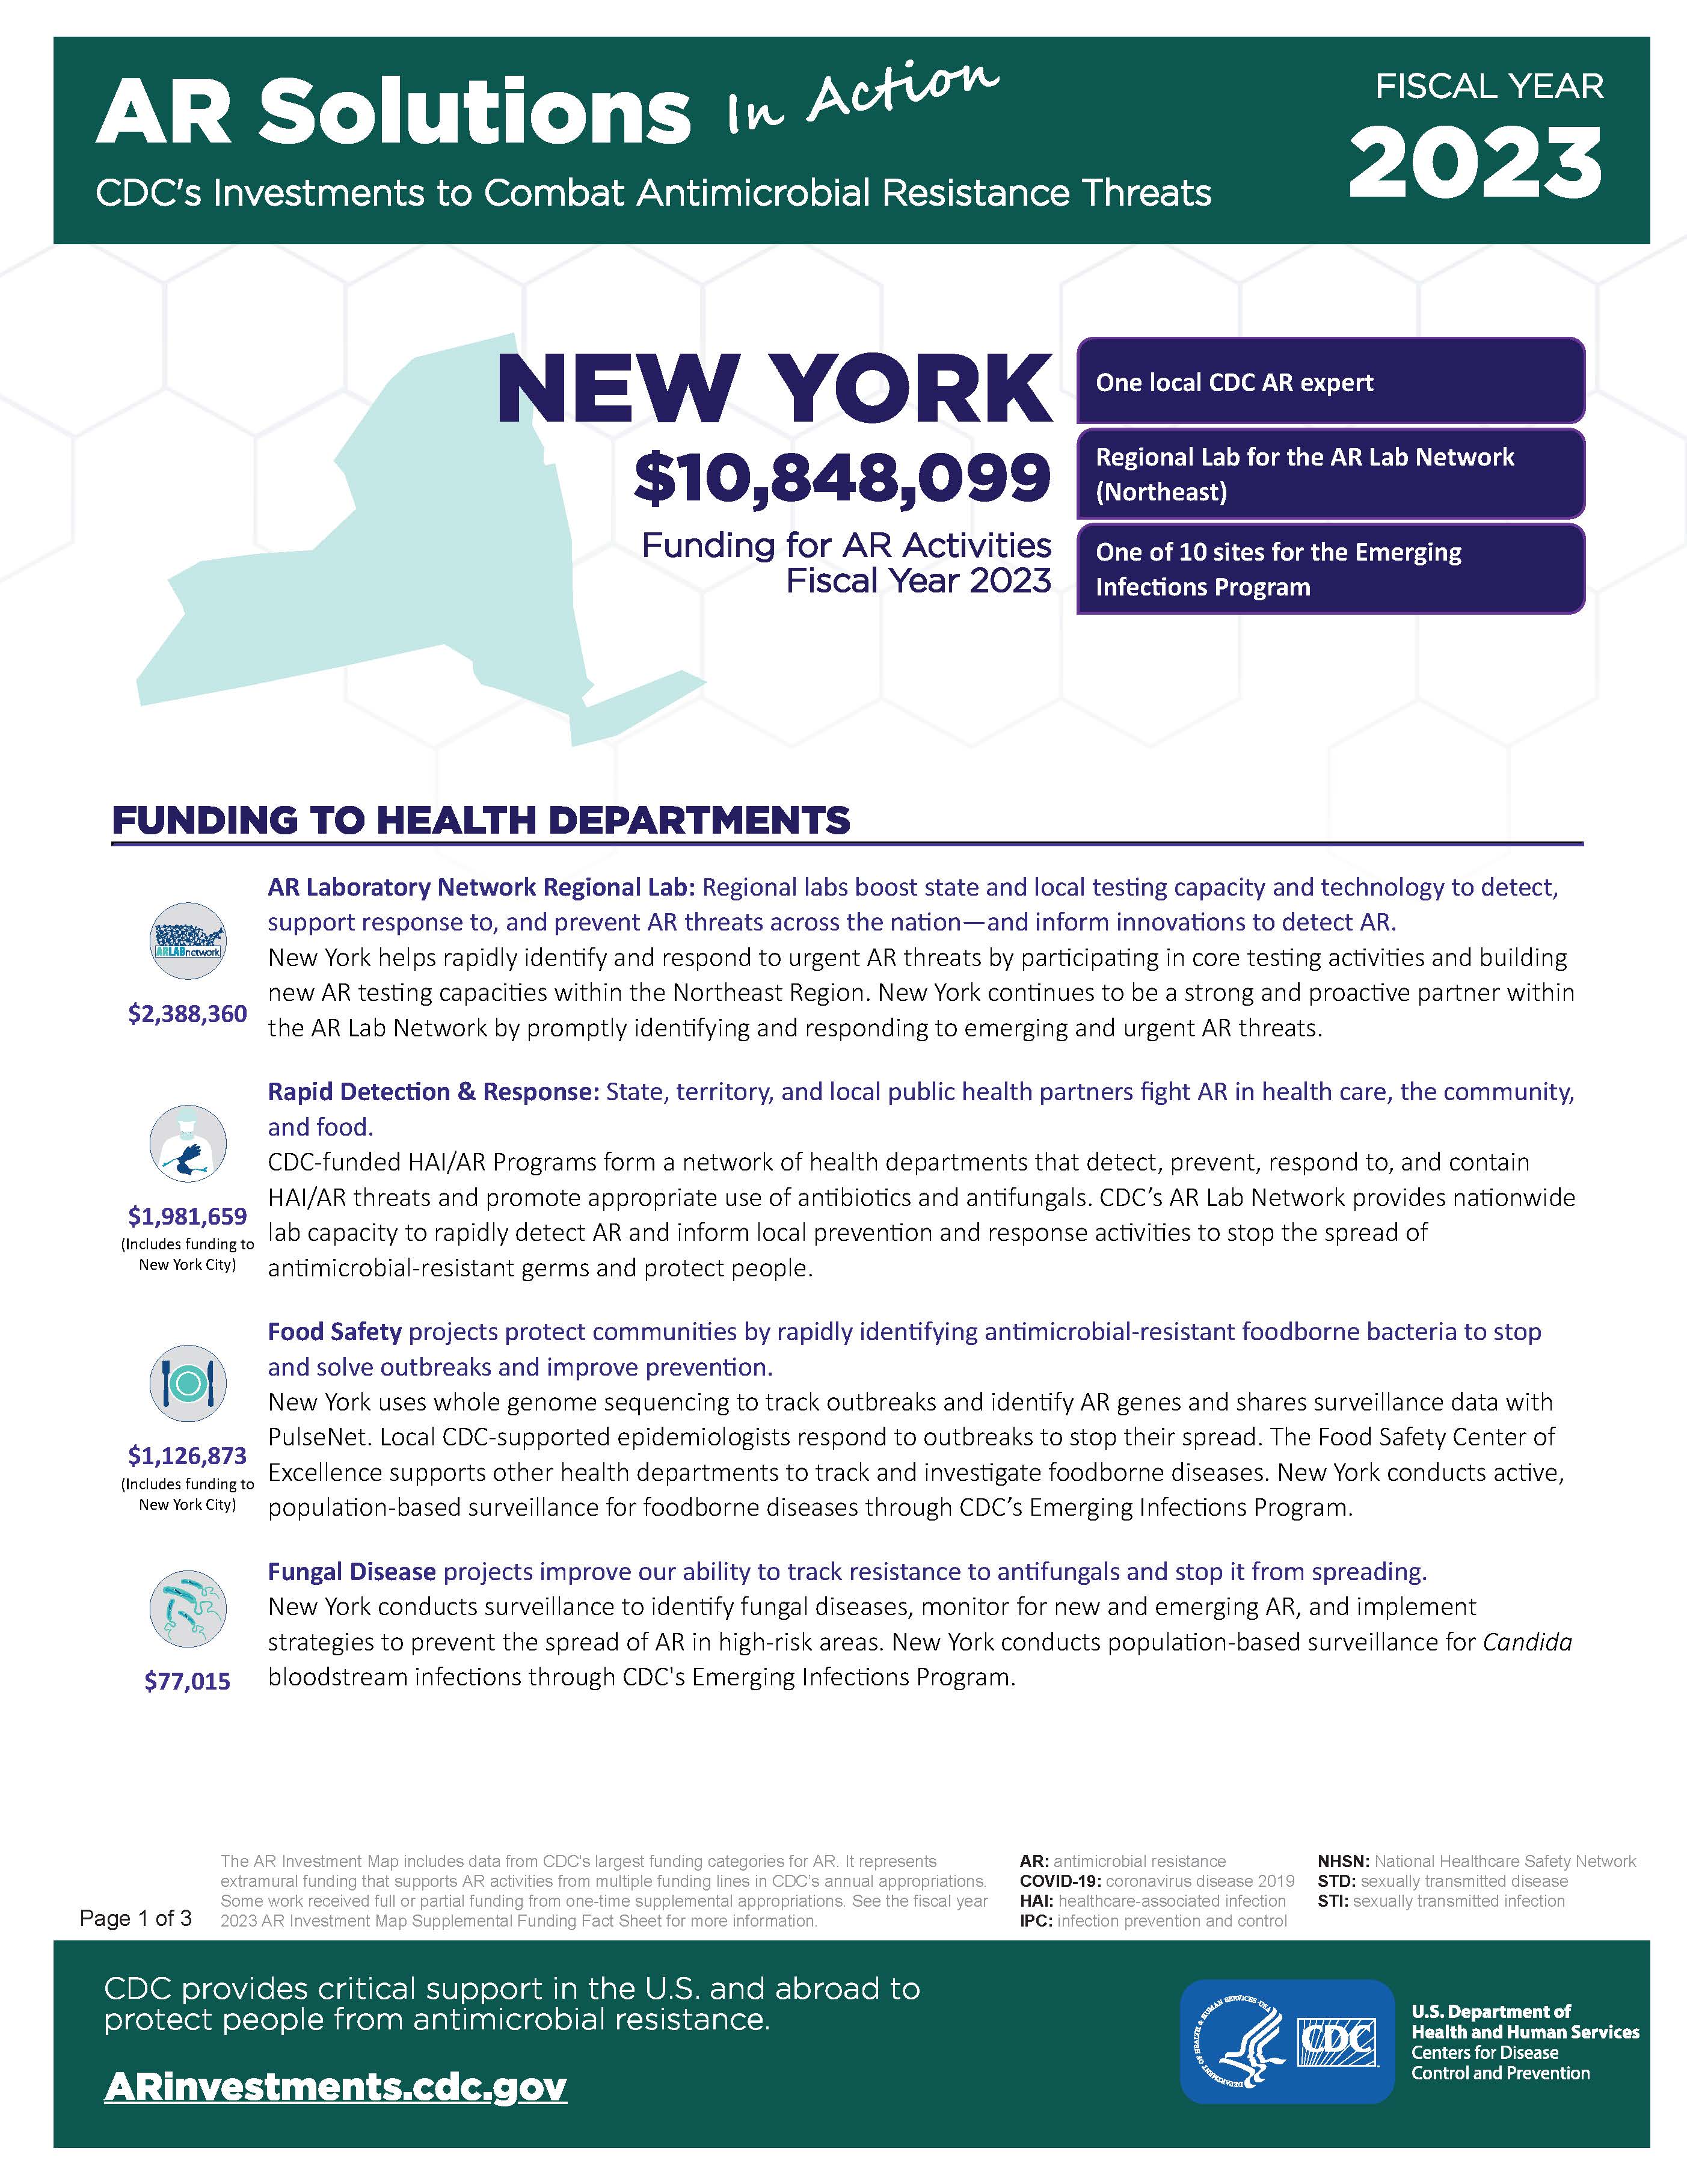 View Factsheet for New York